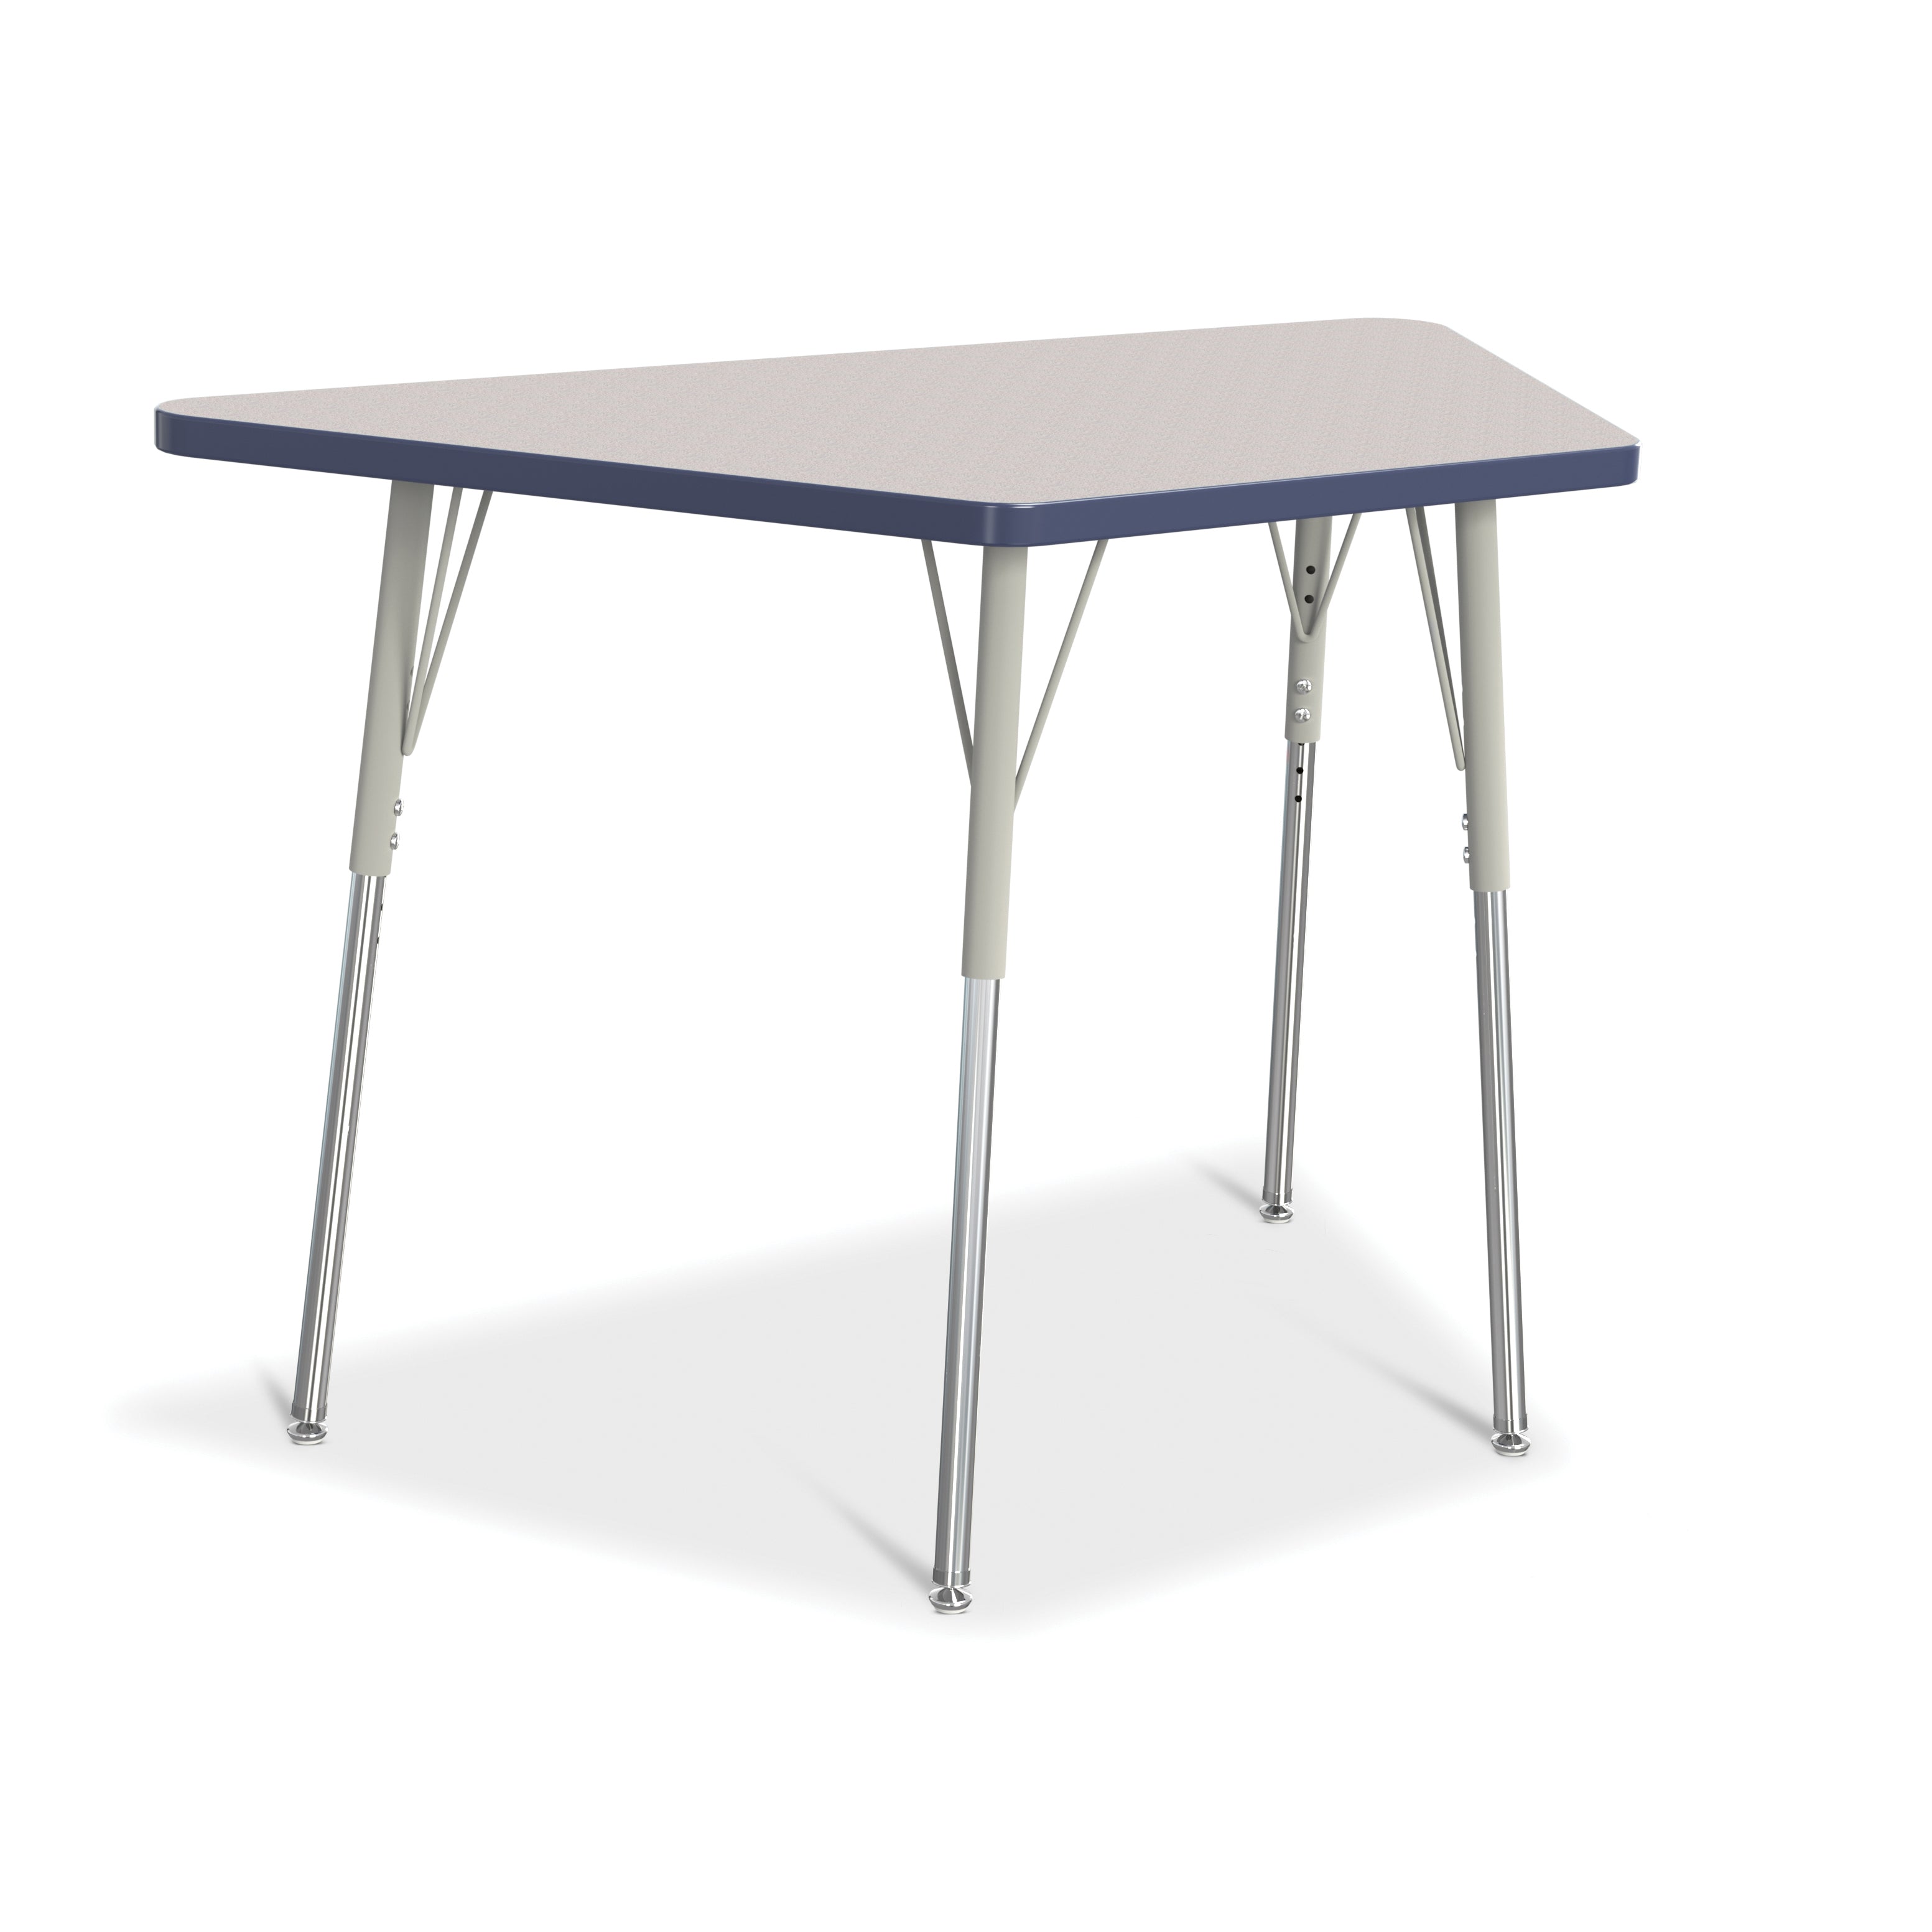 6438JCA112, Berries Trapezoid Activity Tables - 24" X 48", A-height - Freckled Gray/Navy/Gray